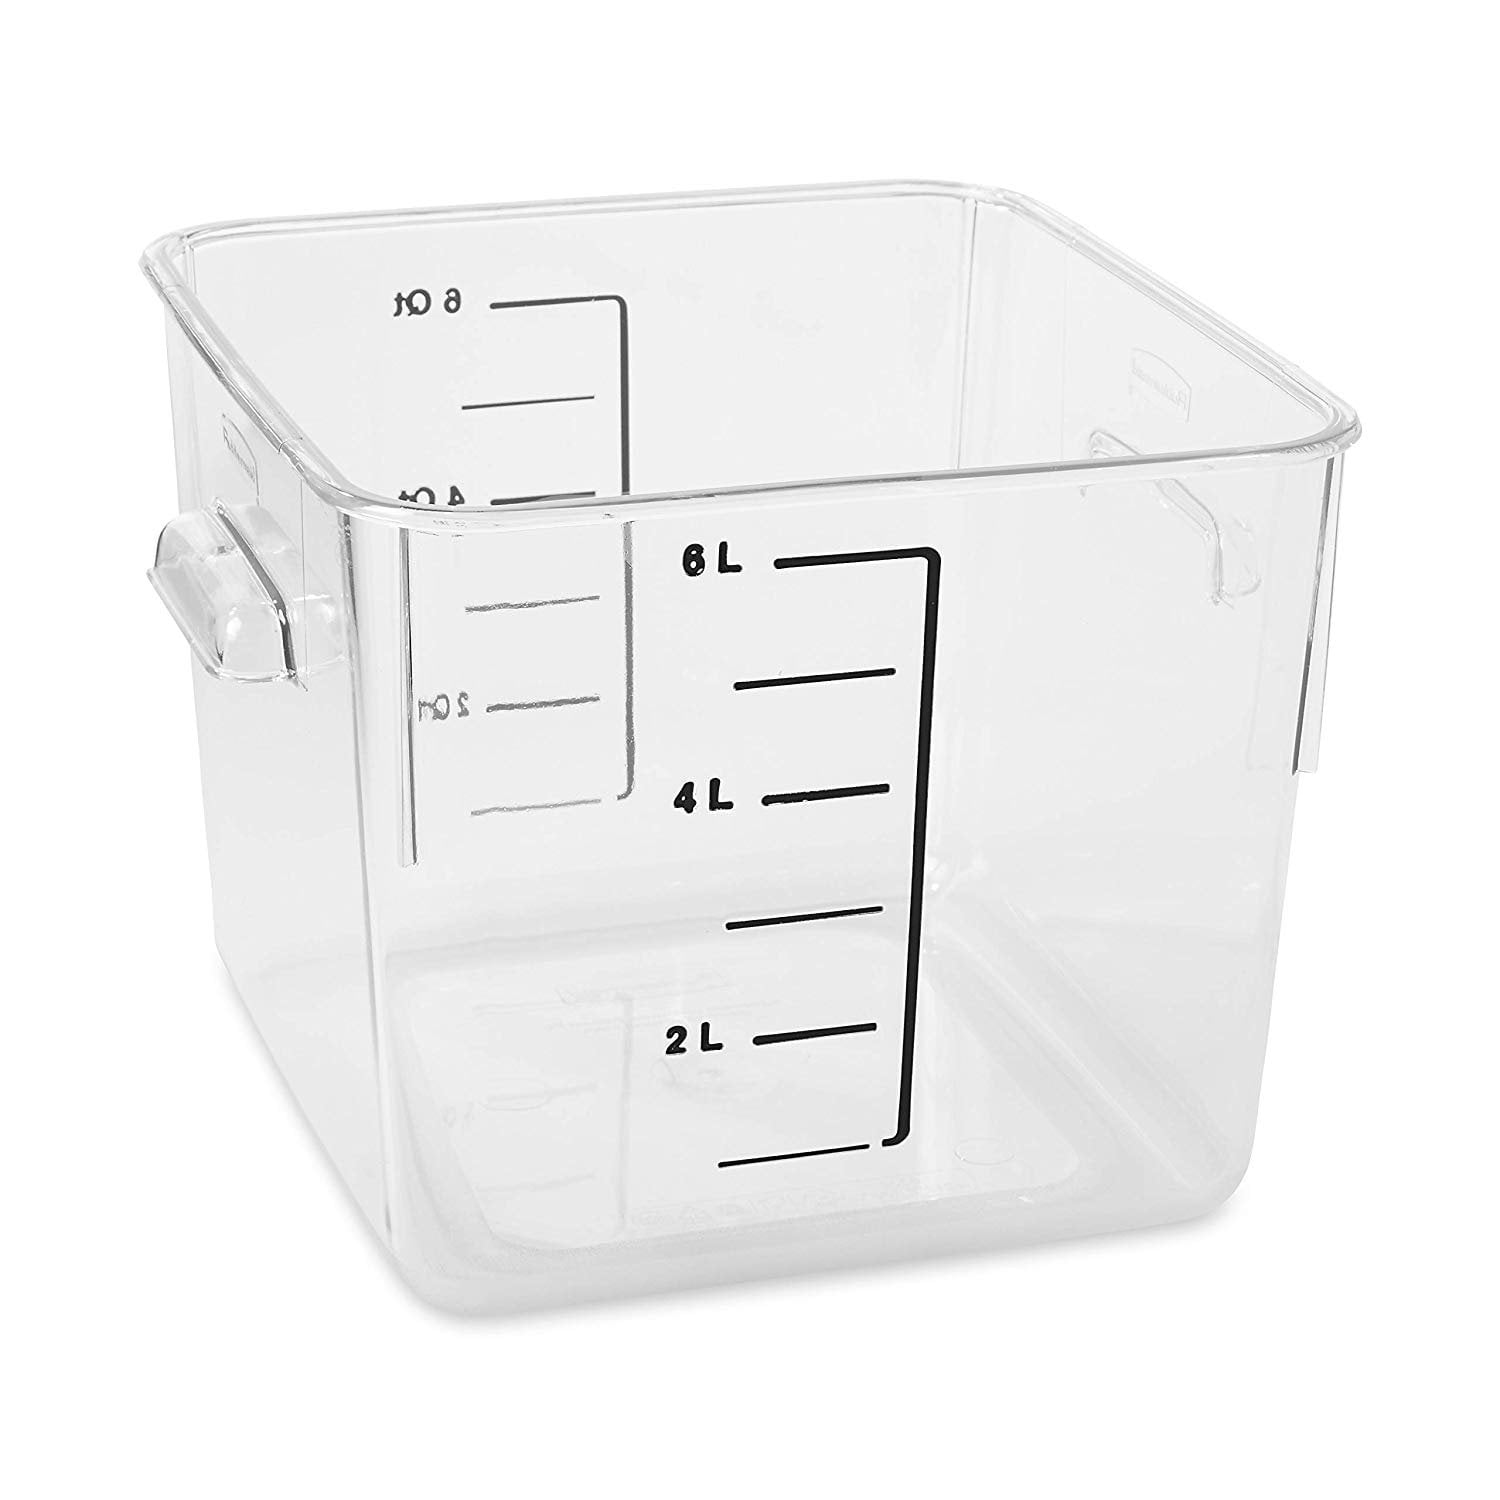 Rubbermaid 6 Qt. Clear Square Polycarbonate Food Storage Container